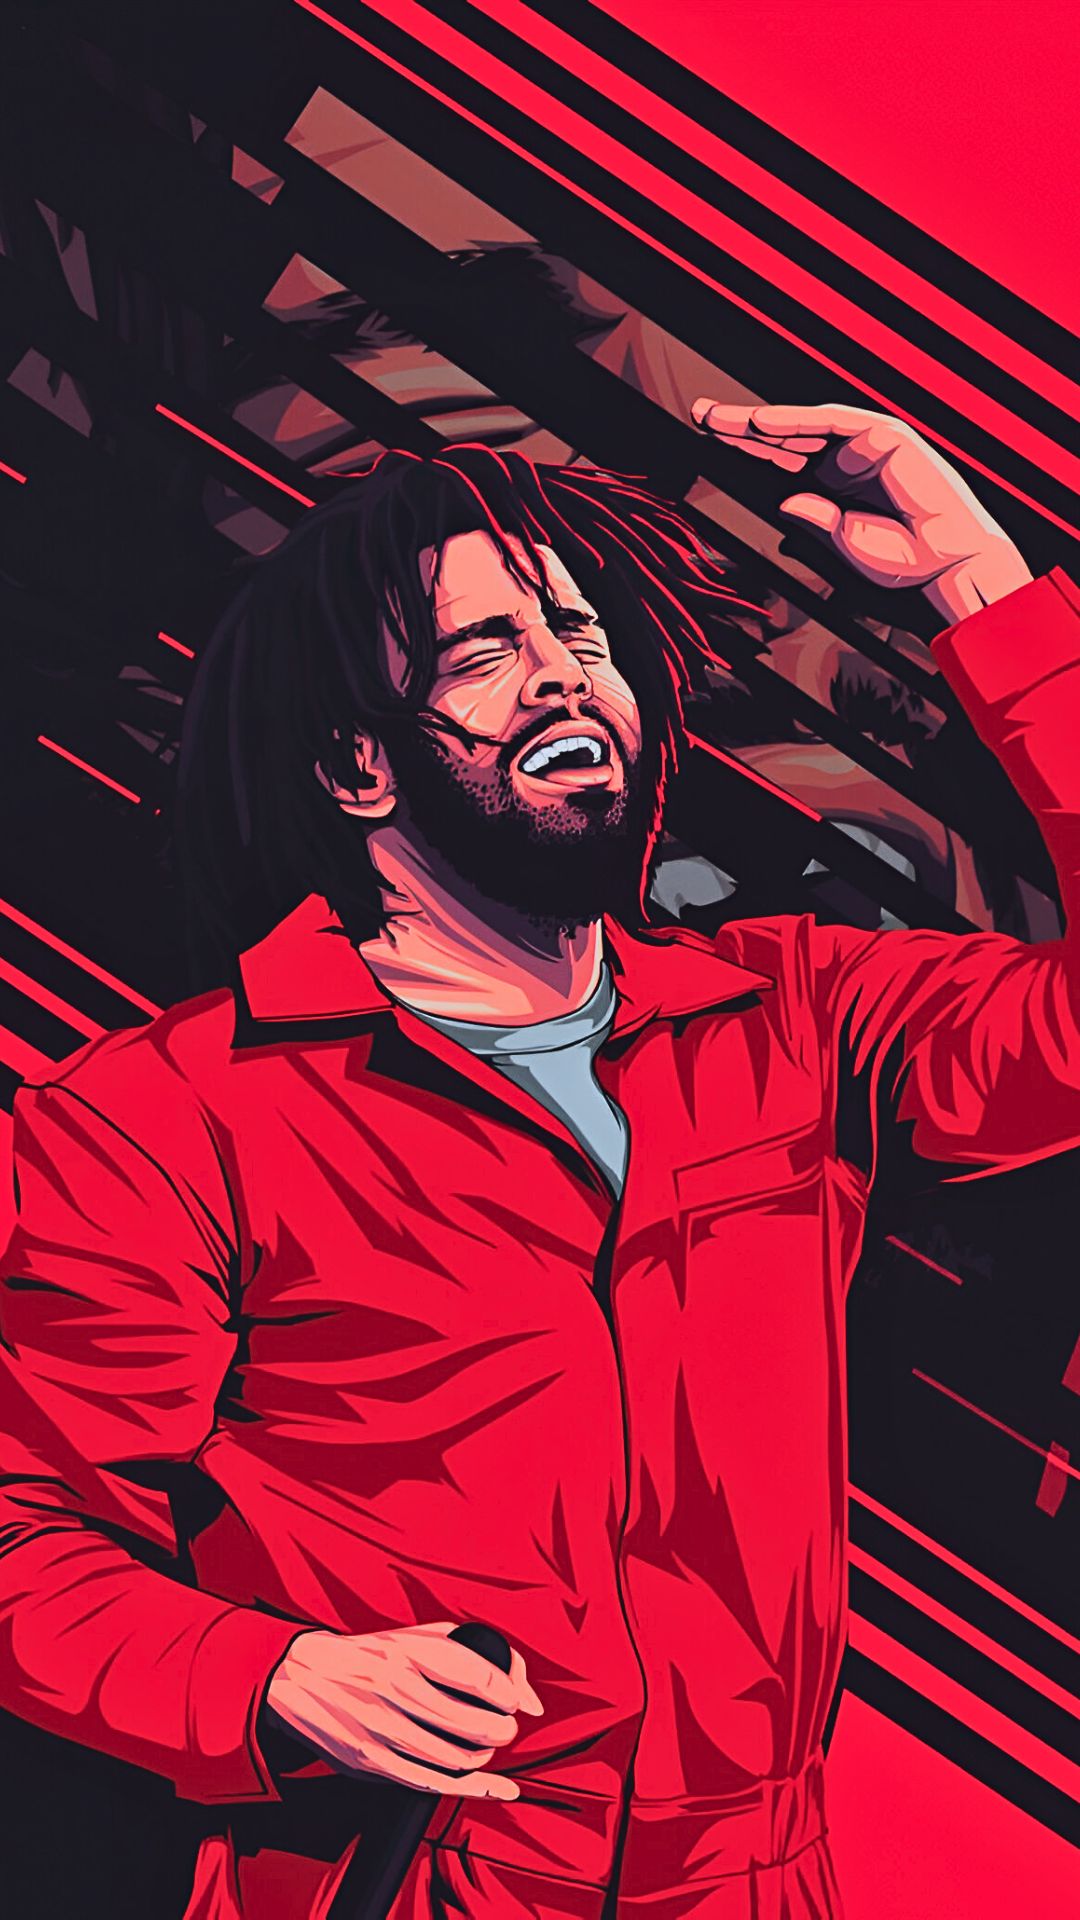 J Cole Animated Wallpaper